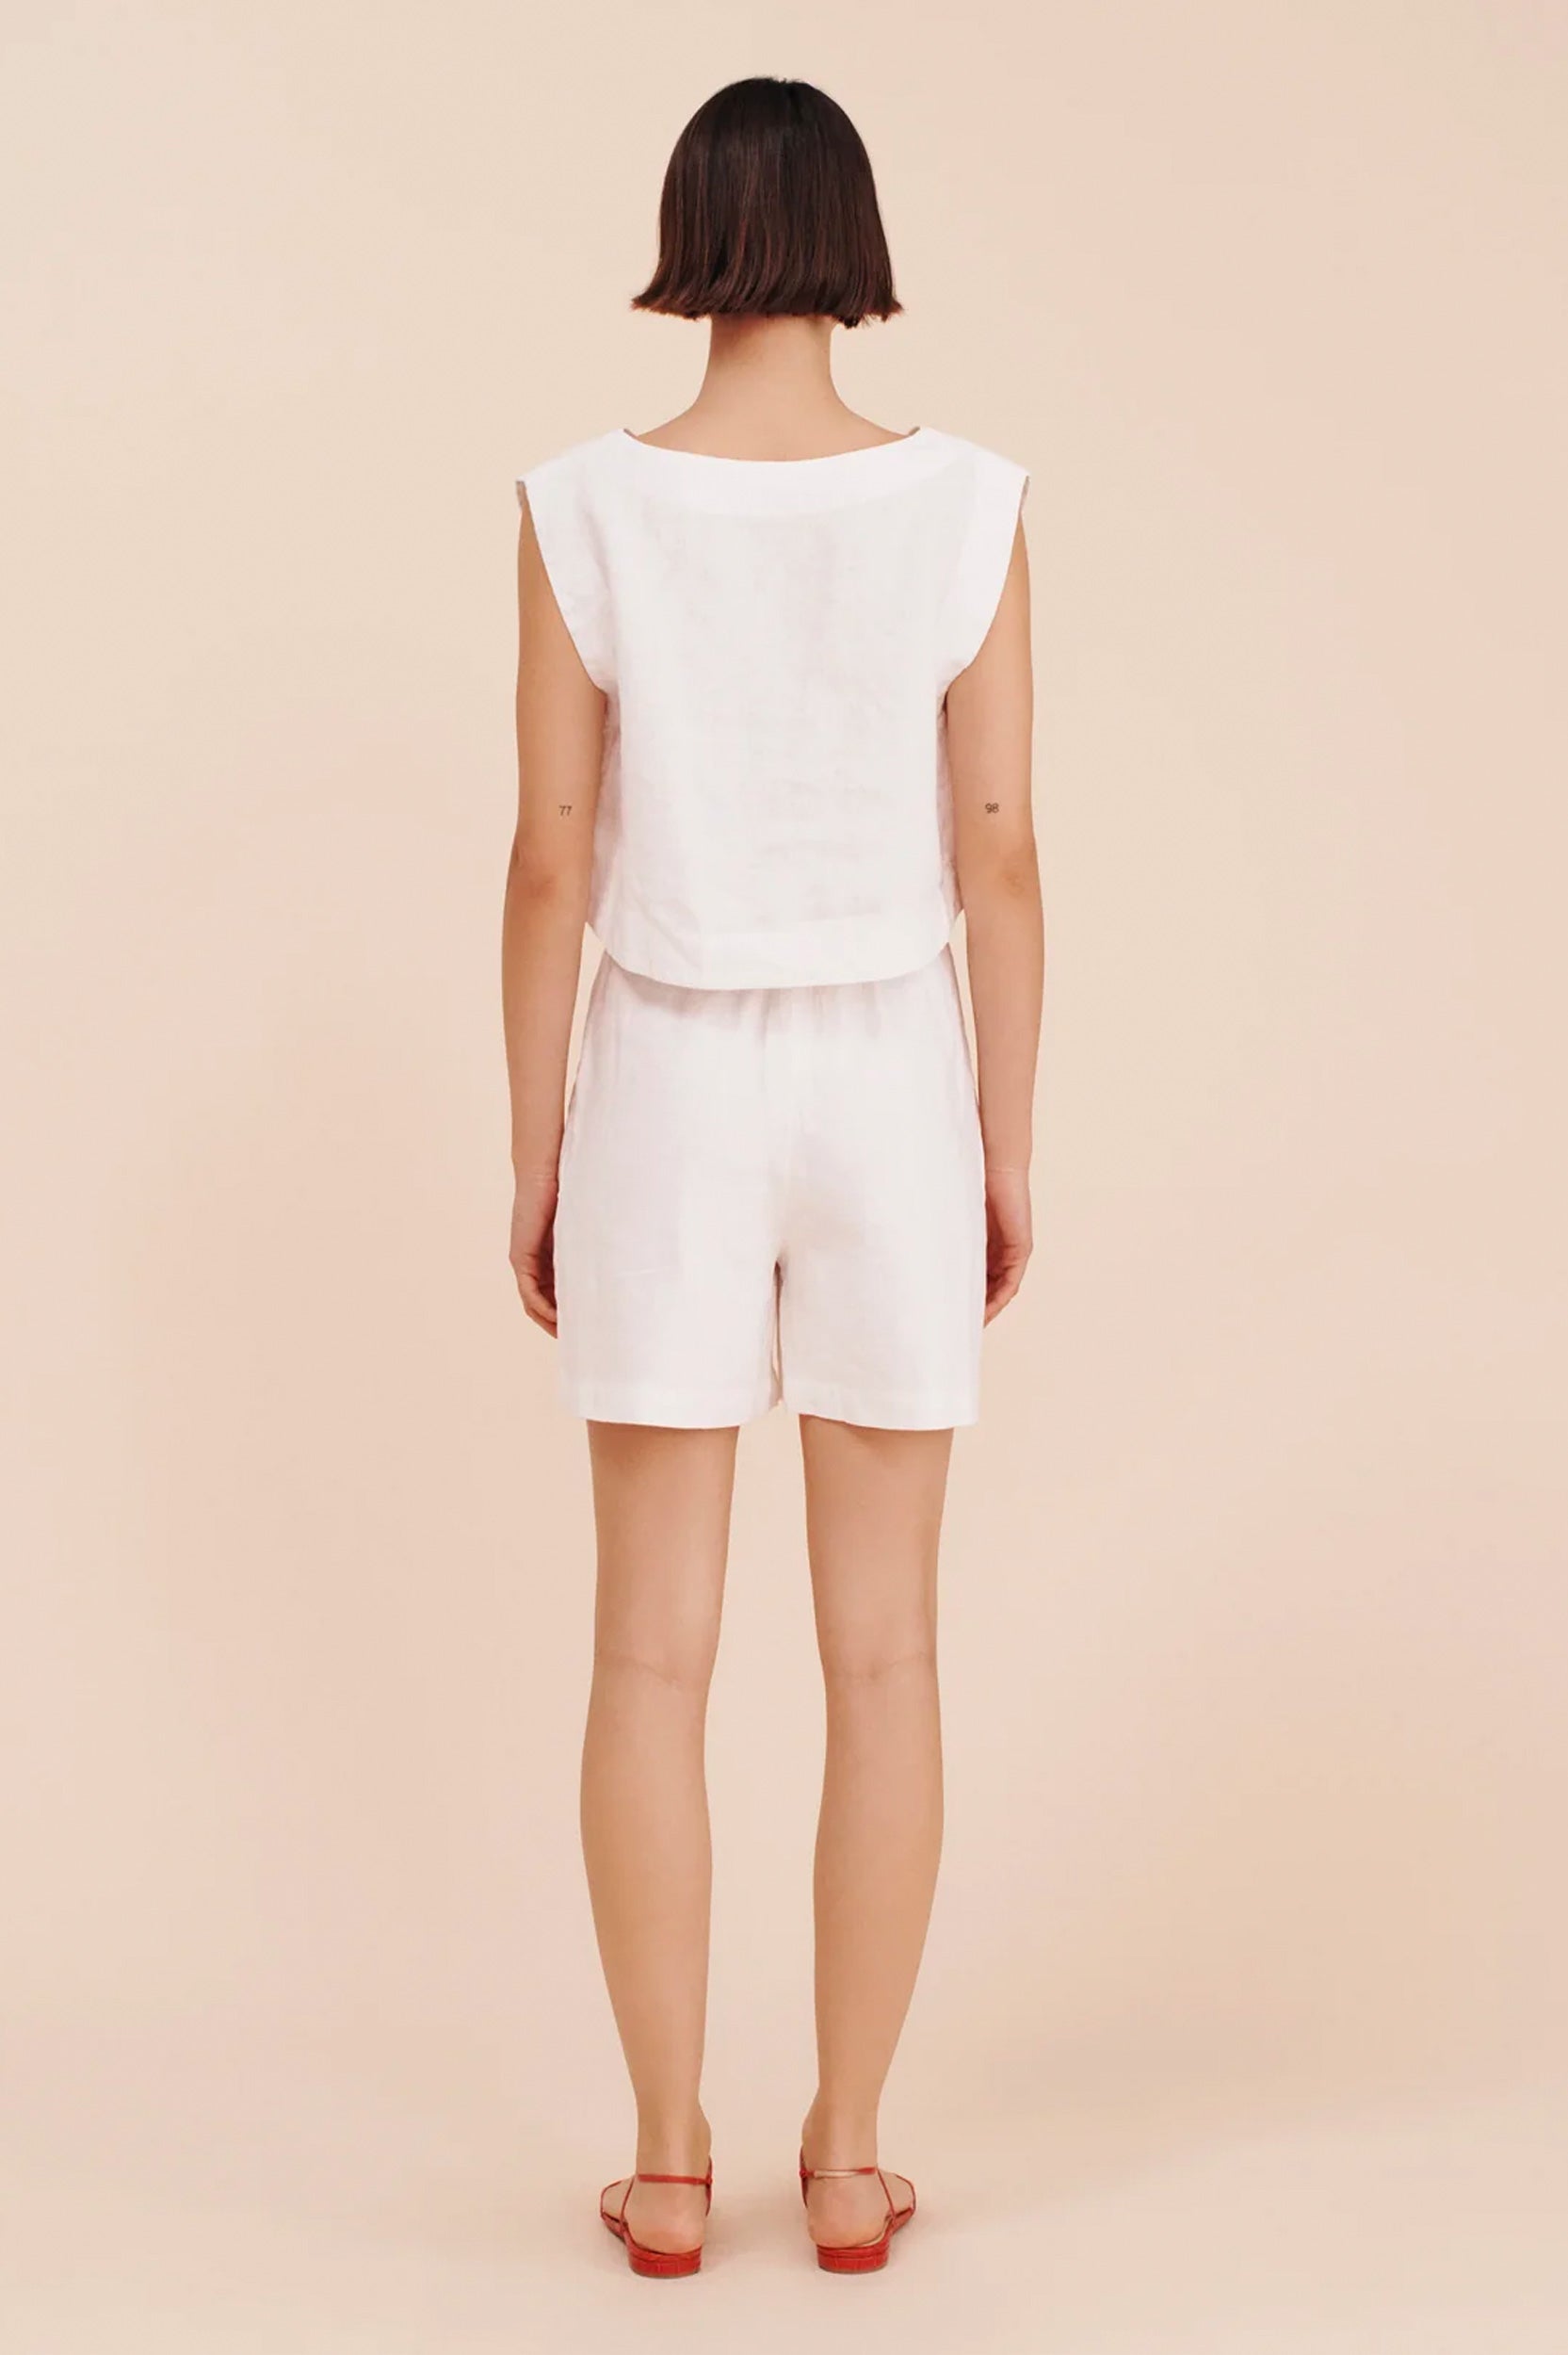 Marchello Short in Ivory